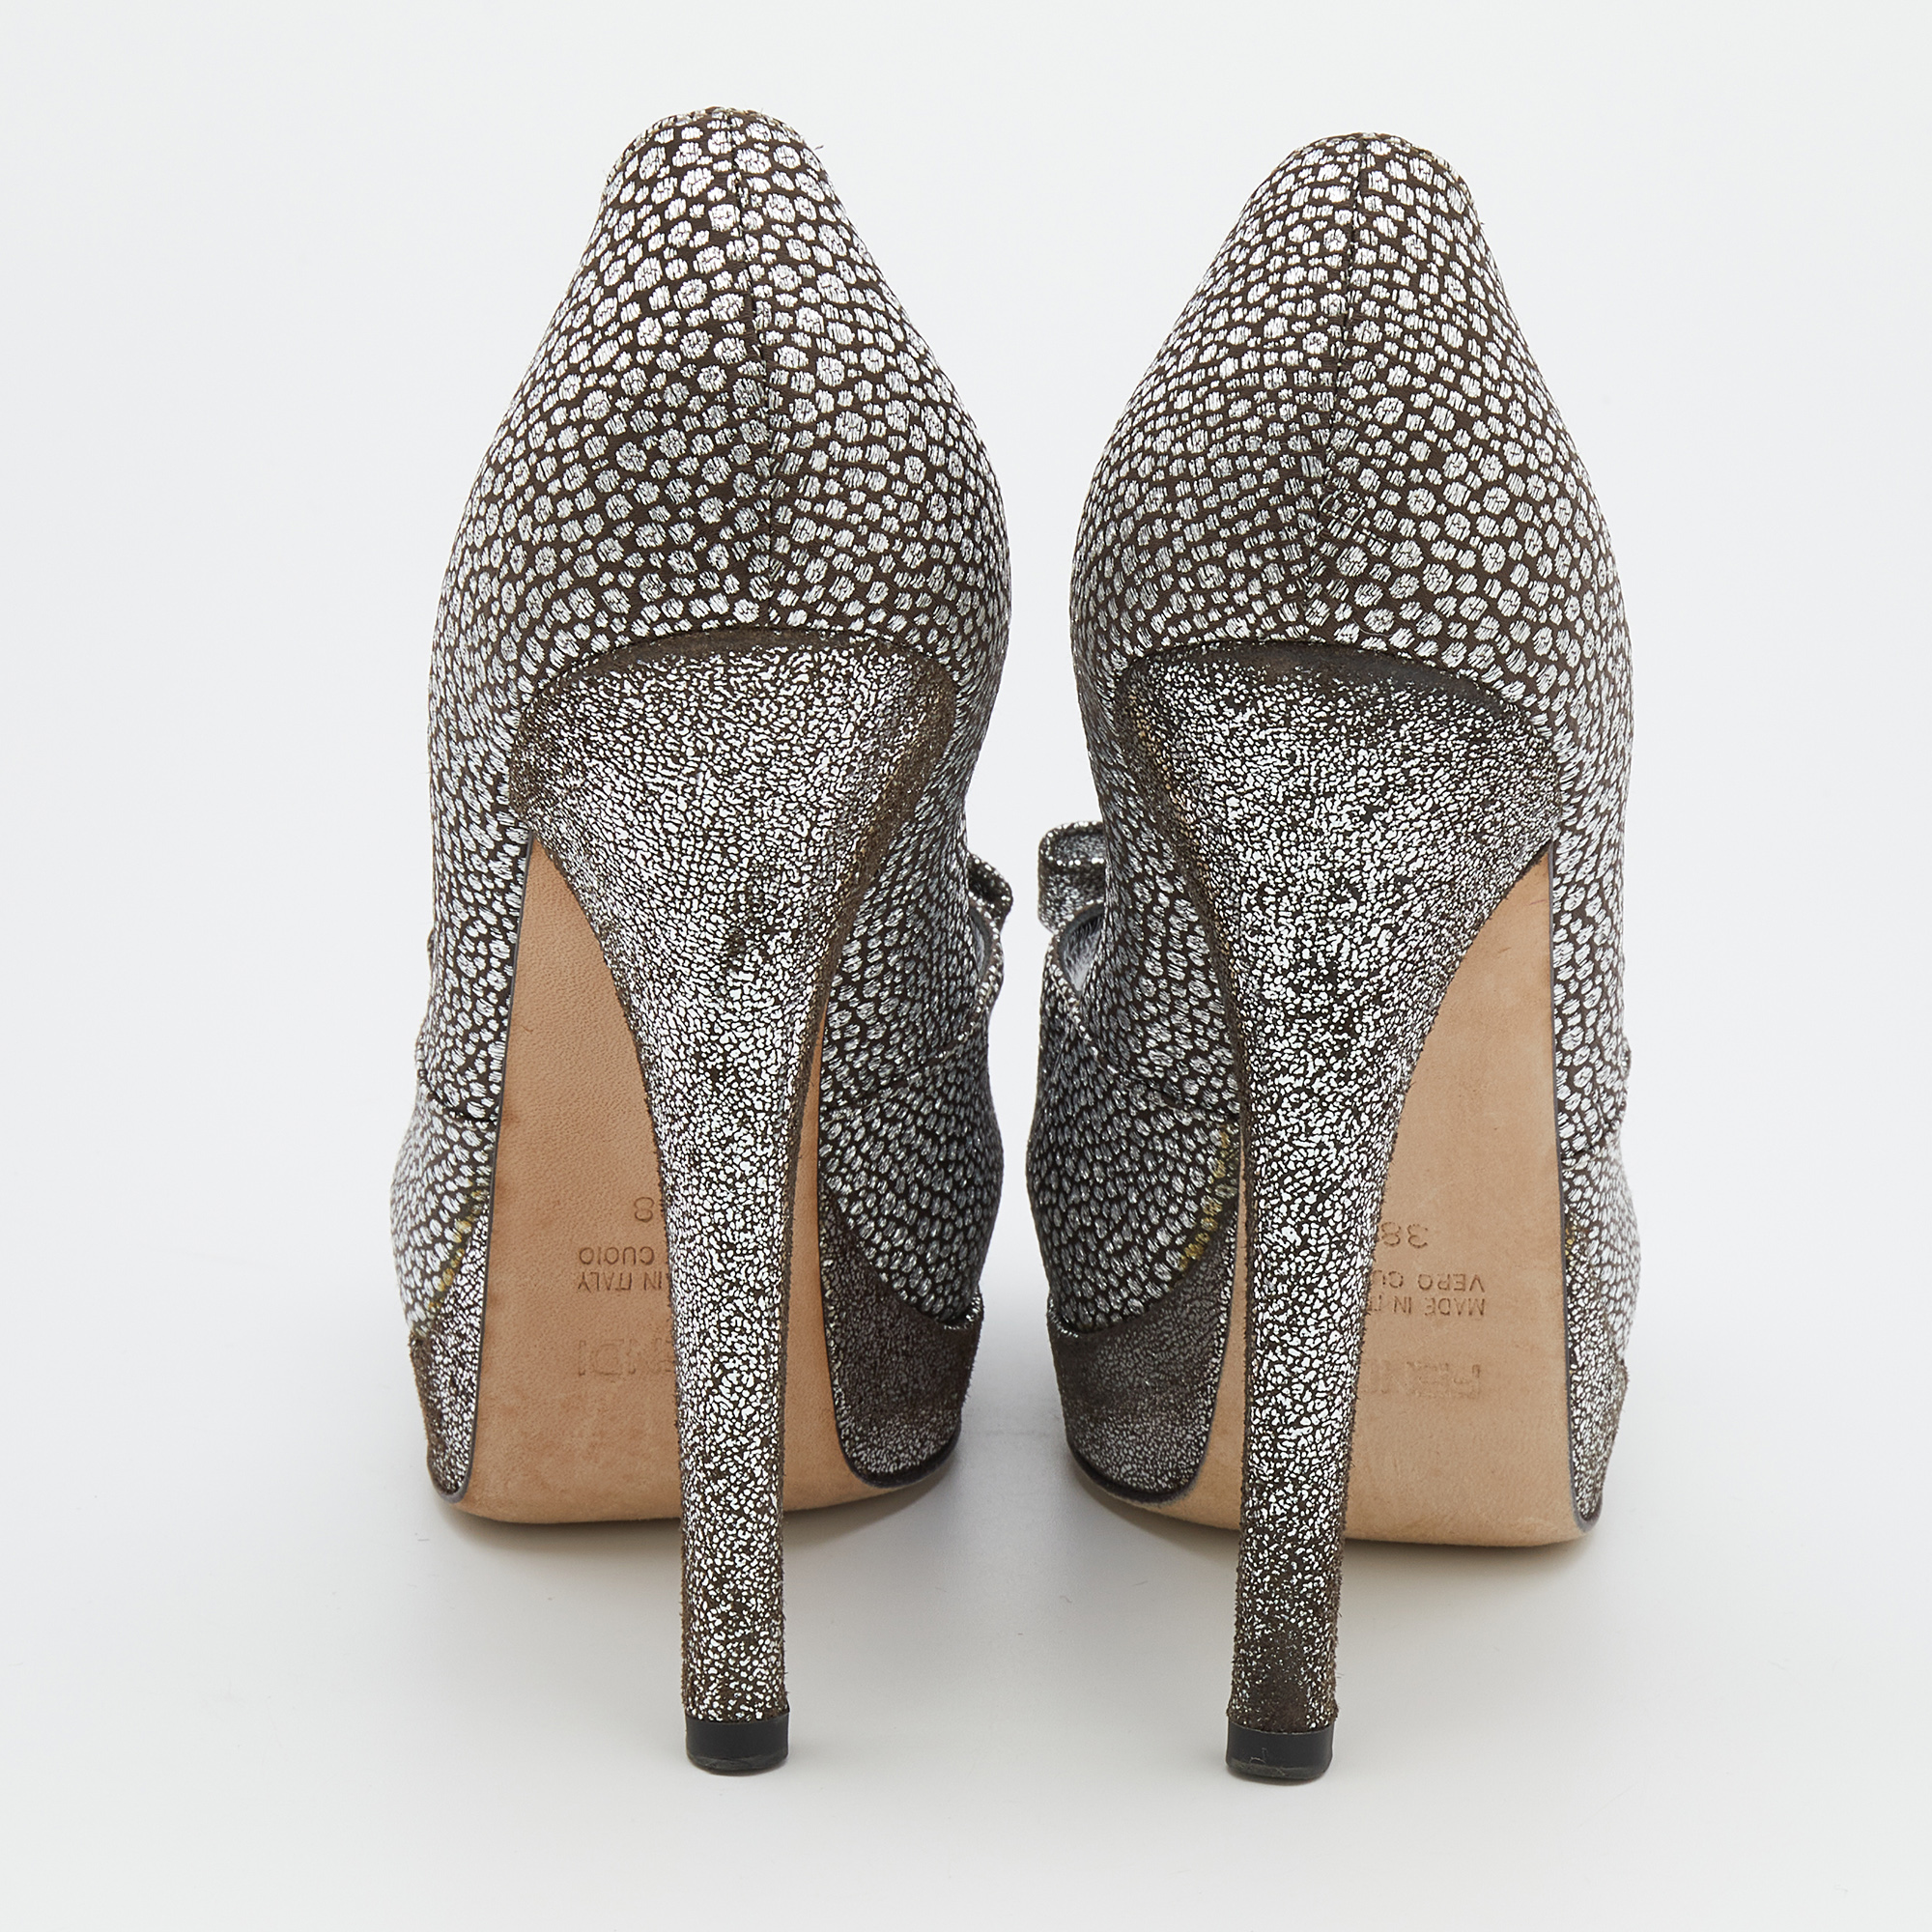 Fendi Silver/Grey Brocade Fabric And Leather Bow Open Toe Platform Pumps Size 38